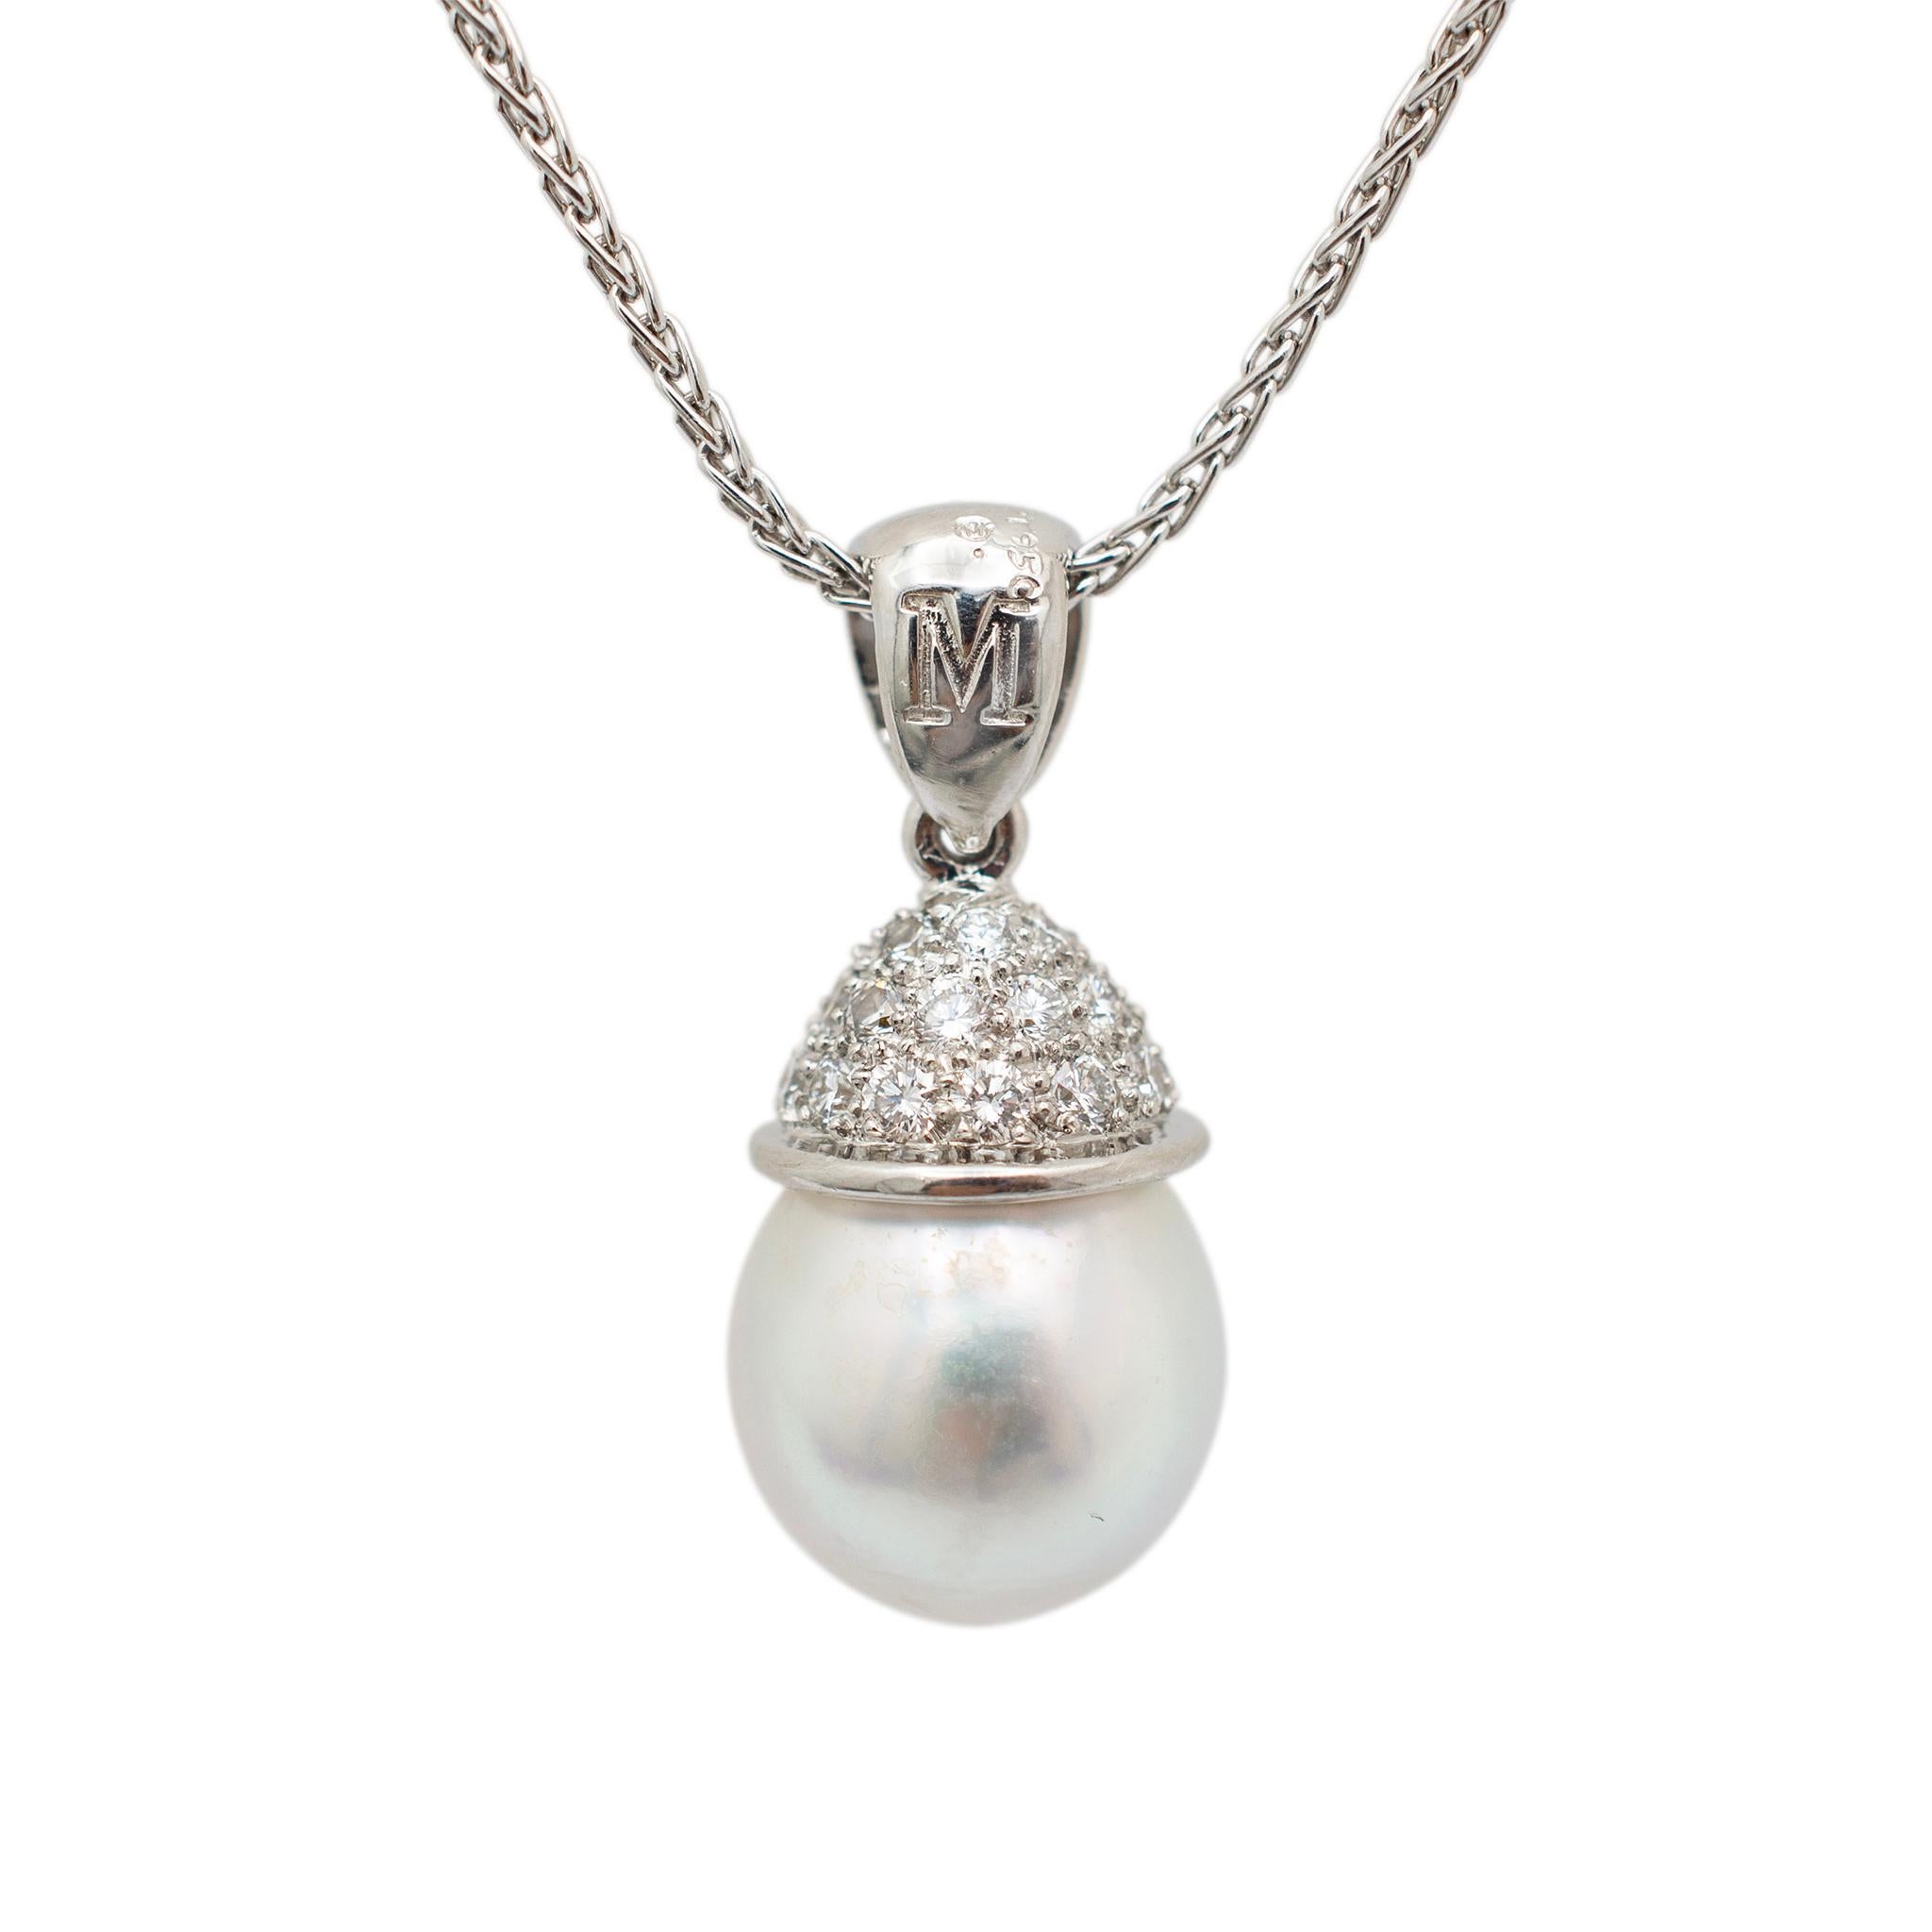 Brand: Mikimoto 

Gender: Ladies

Metal Type: Platinum 

Pendant Length: 1.00 Inches

Chain Length:  17.50 Inches

Pendant Diameter: 12.00 mm

Chain Width: 1.25 mm

Pendant Weight:  5.36 grams

Chain Weight: 5.65 grams

950 platinum diamond and